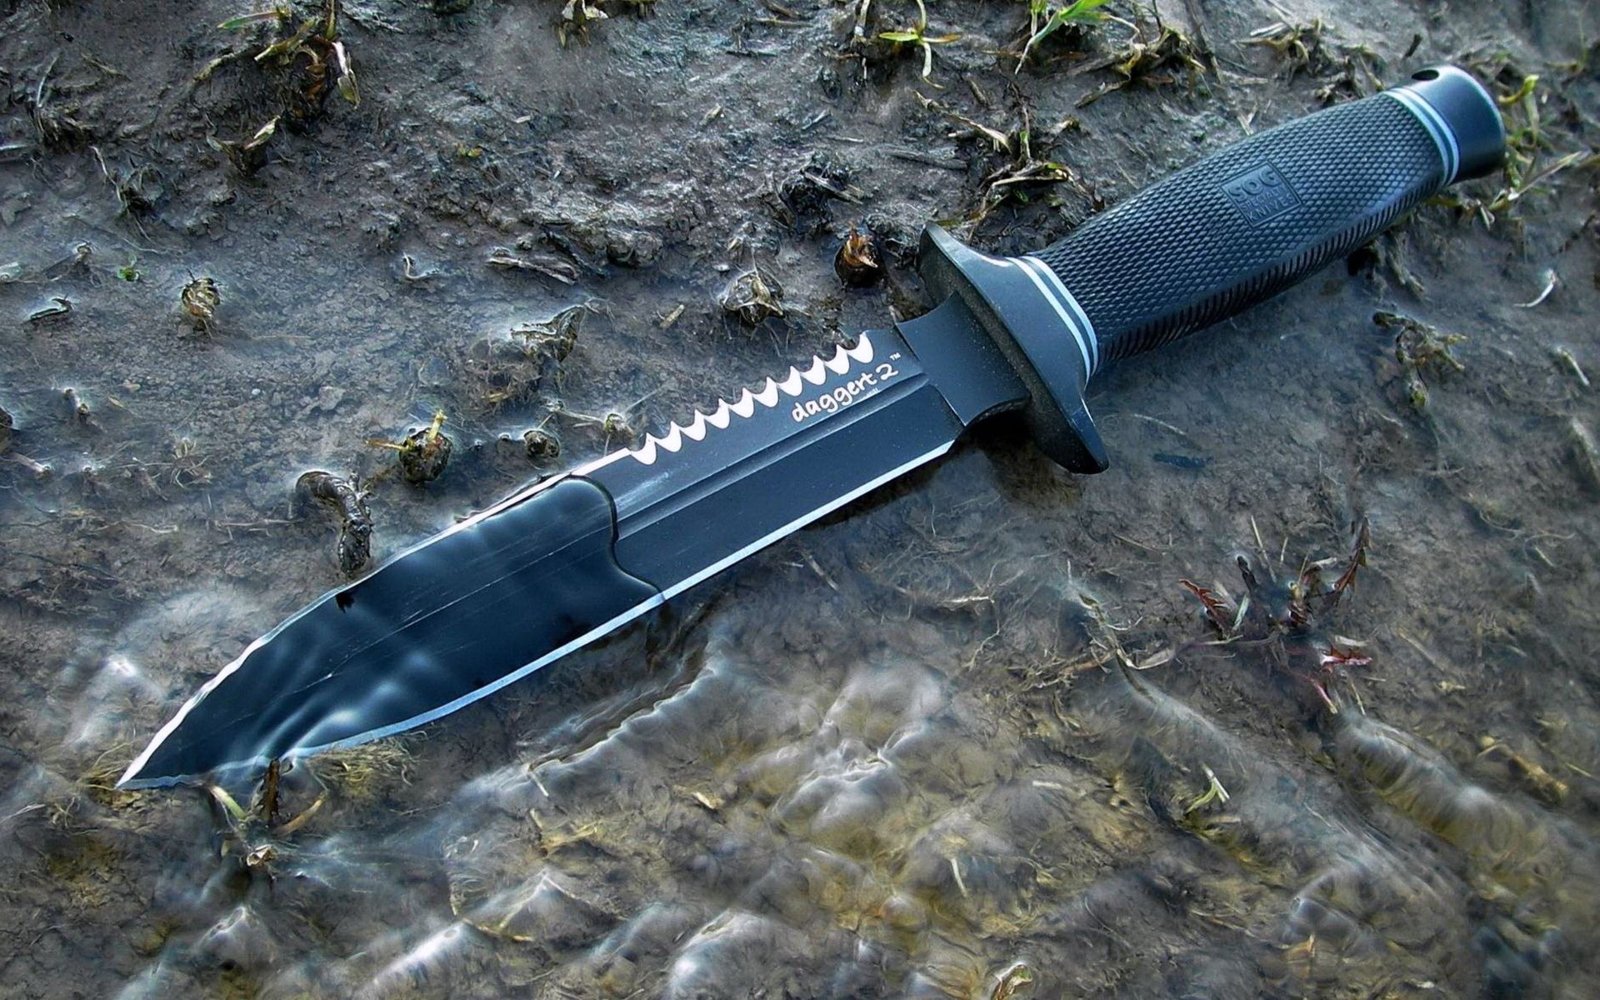 knife-awesome-hd-wallpaper-of-high-quality.jpg